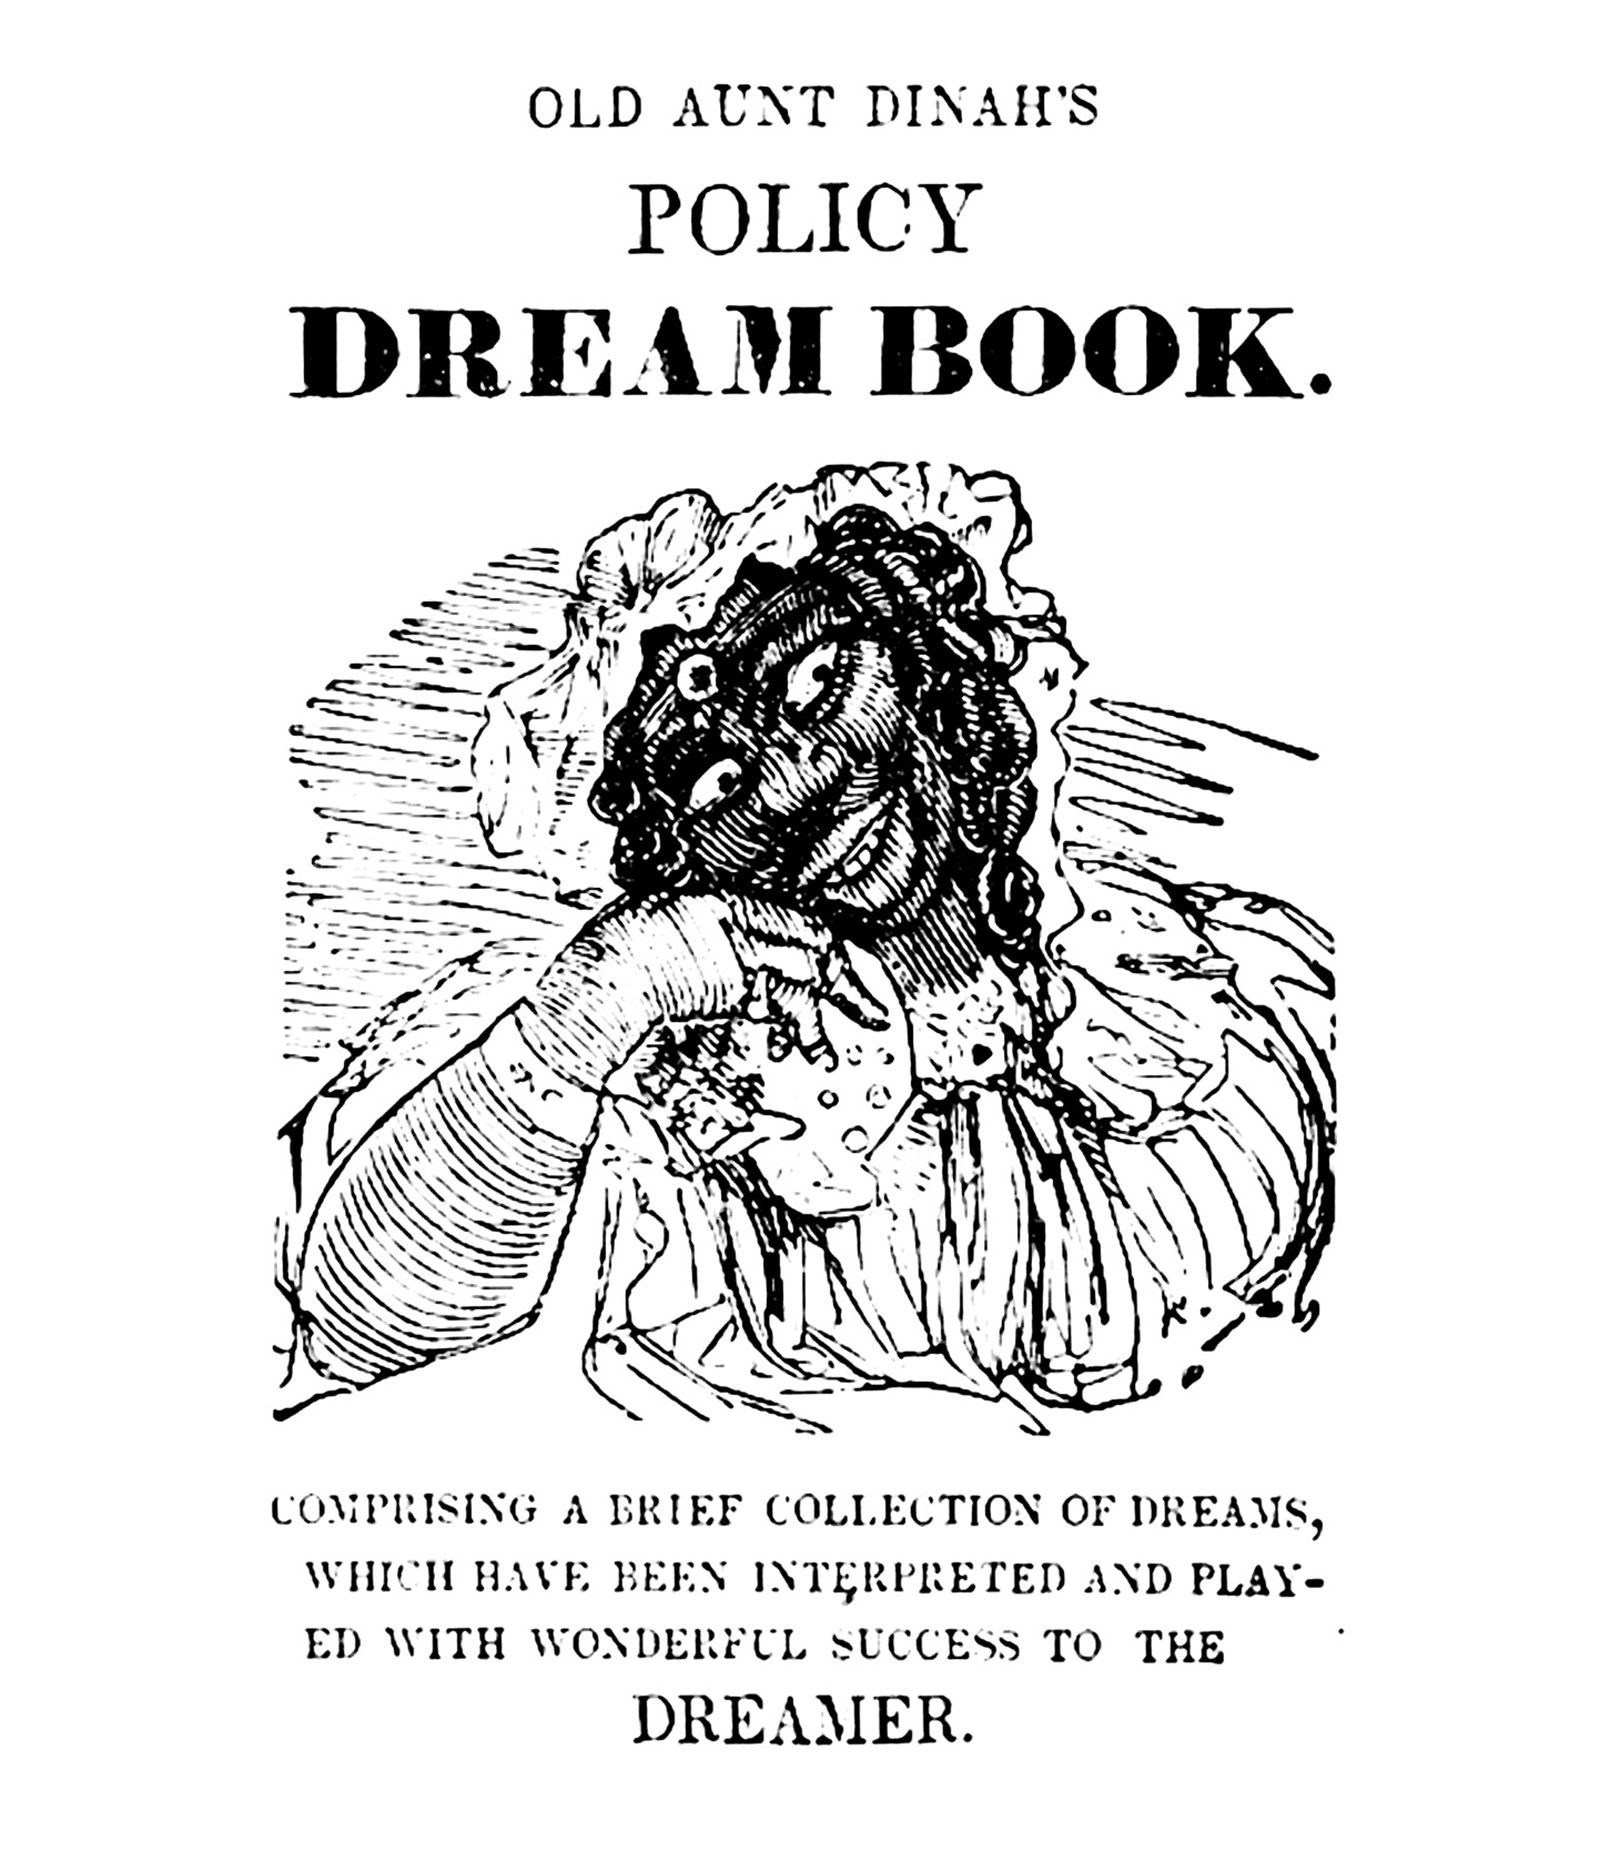 Title page of an 1850 edition of Old Aunt Dinah’s Policy Dream Book.